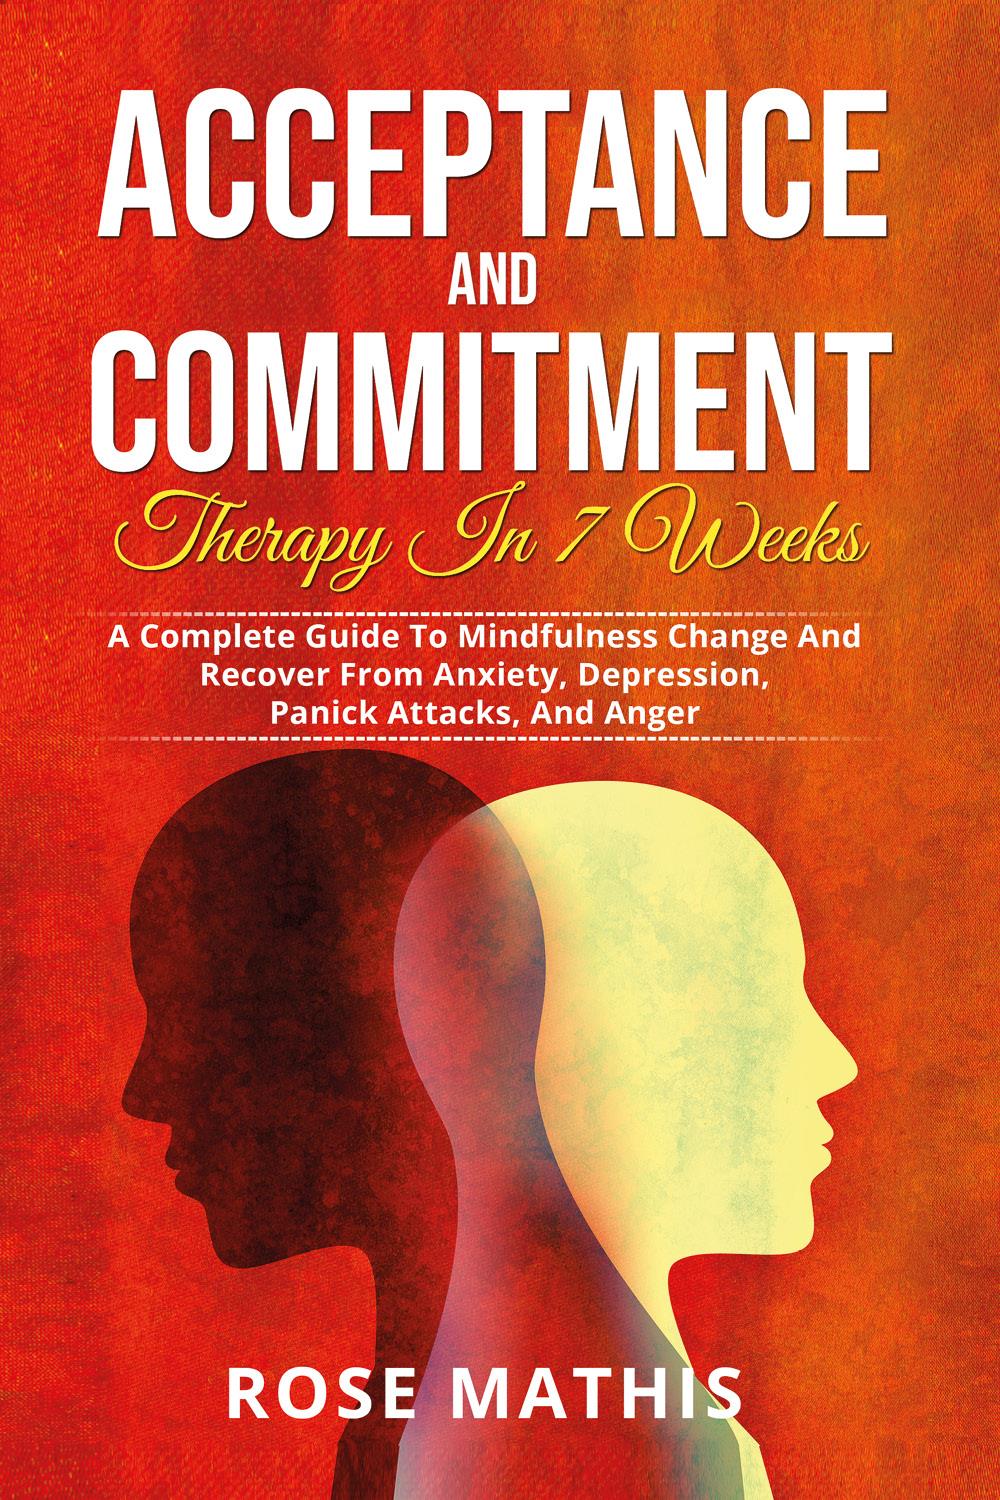 Acceptance and Commitment Therapy in 7 weeks. A Complete Guide To Mindfulness Change And Recover From Anxiety, Depression, Panick Attacks, And Ange